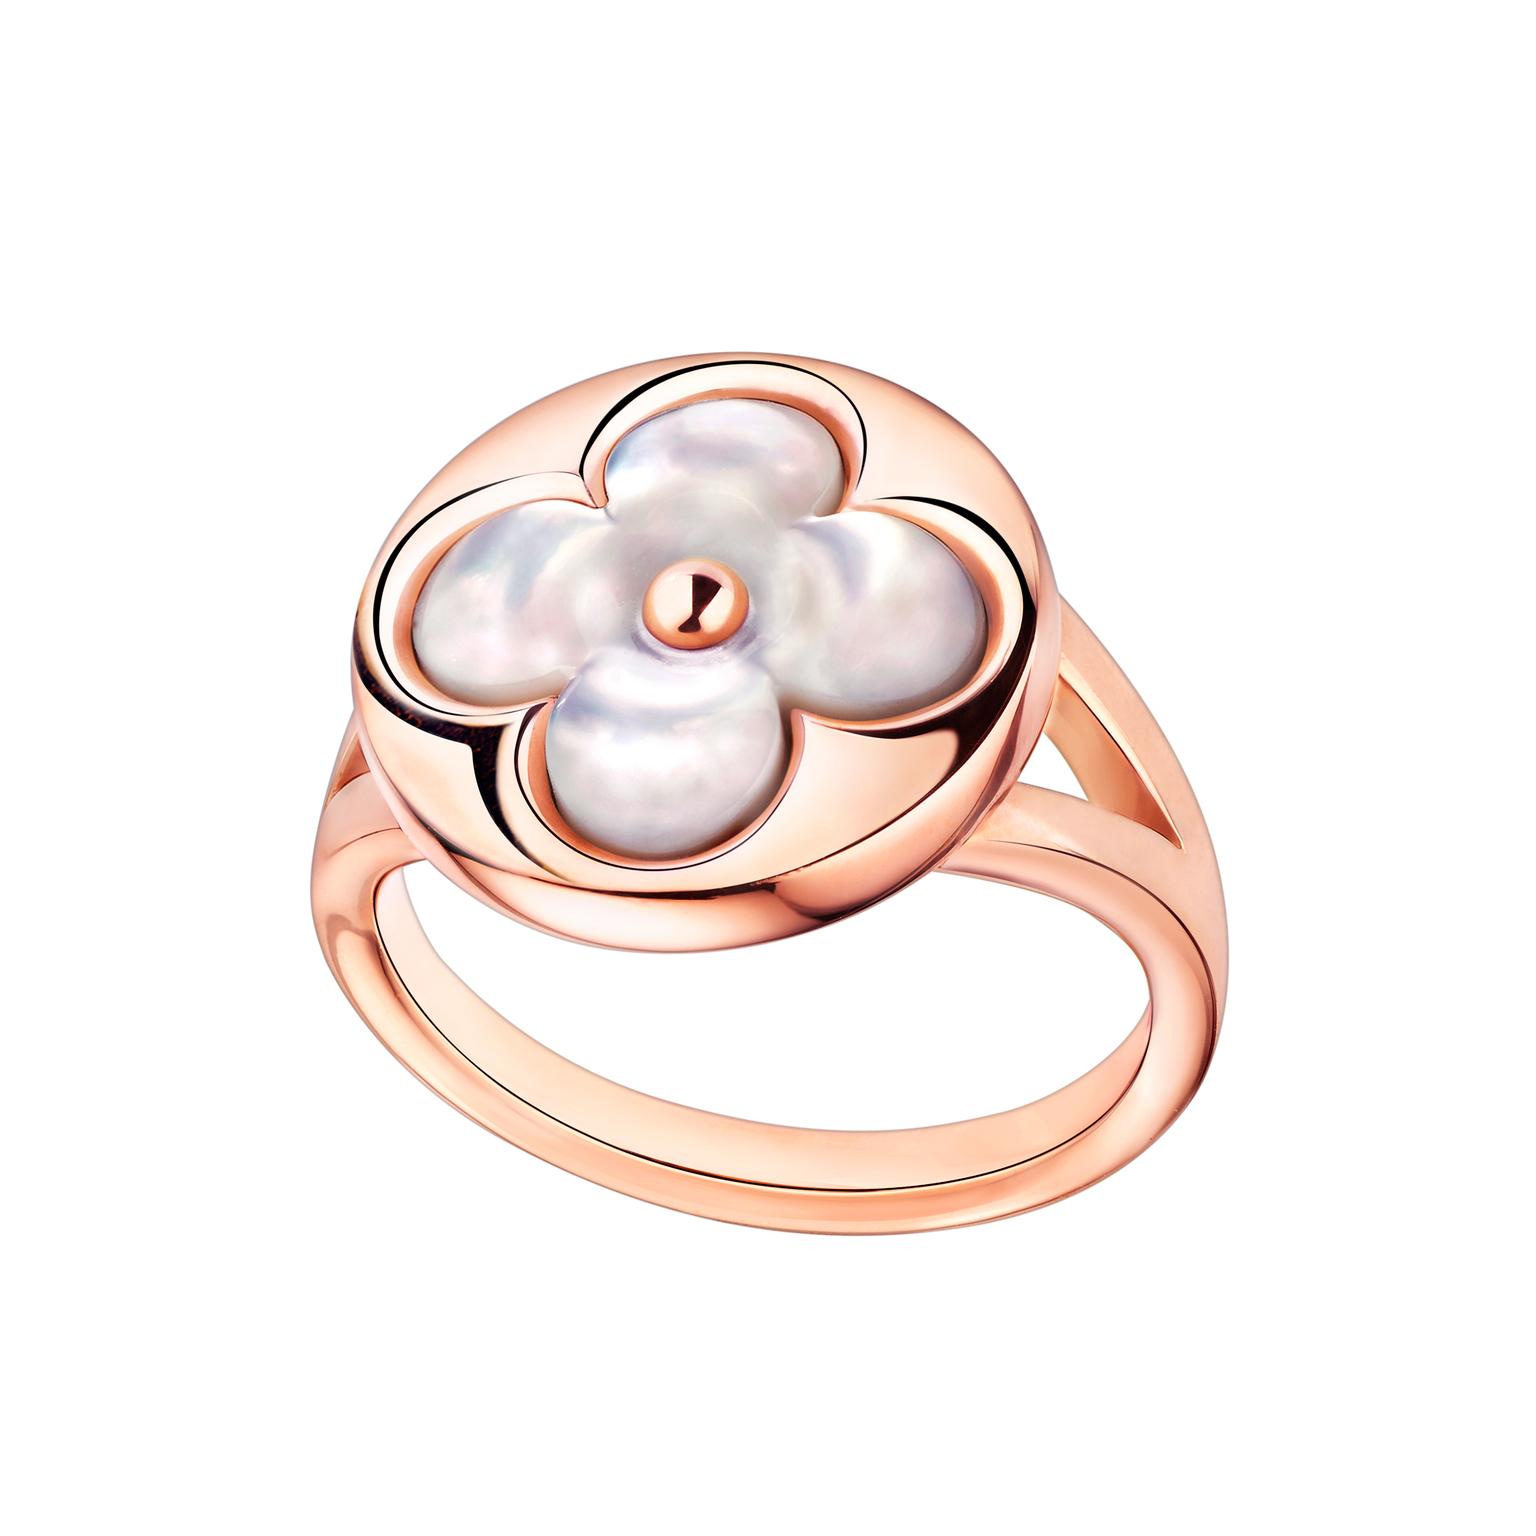 Blossom mother-of-pearl ring, Louis Vuitton